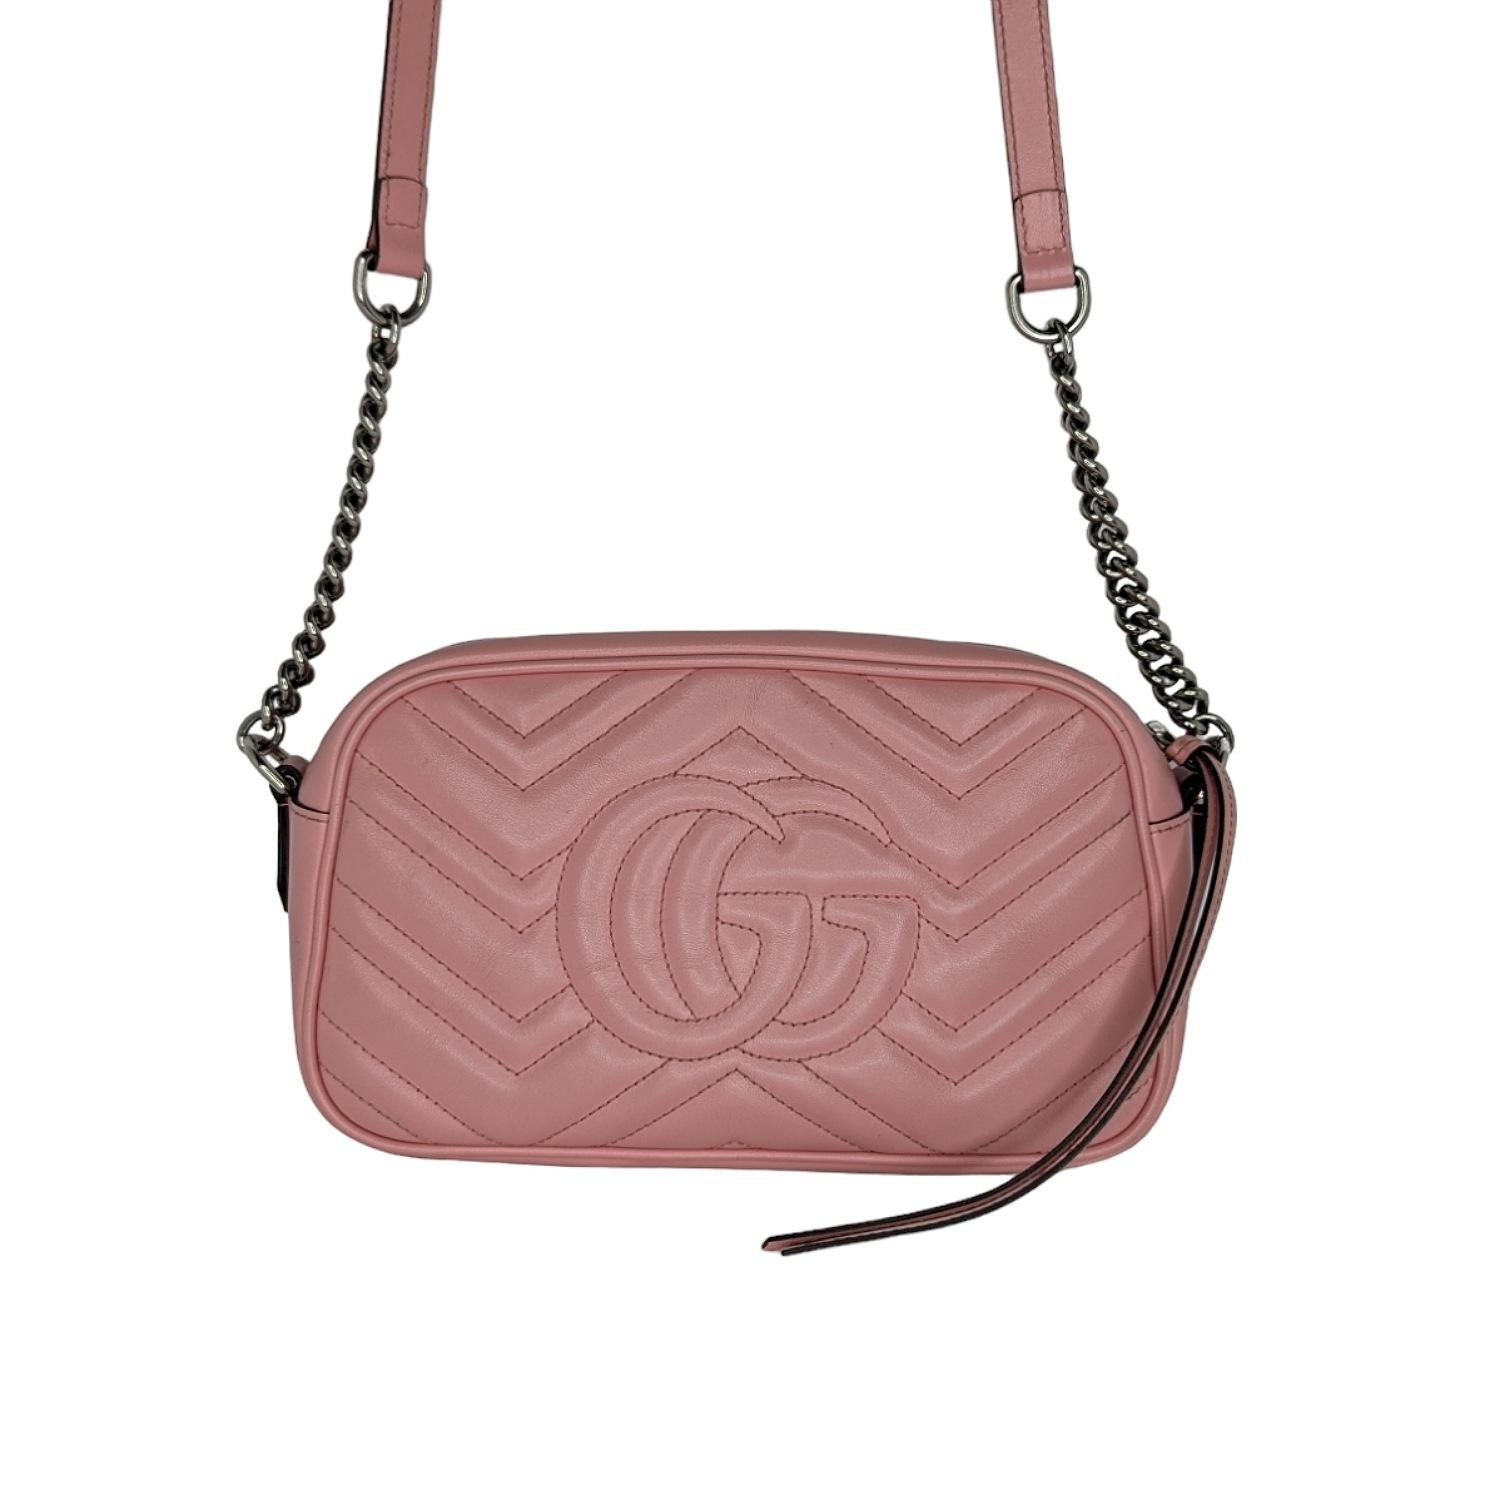 The small GG Marmont chain shoulder bag has a softly structured shape and a zip top closure with the Double G hardware. The chain shoulder strap has a leather shoulder detail. The camera bag is made in matelassé leather with a chevron design and GG